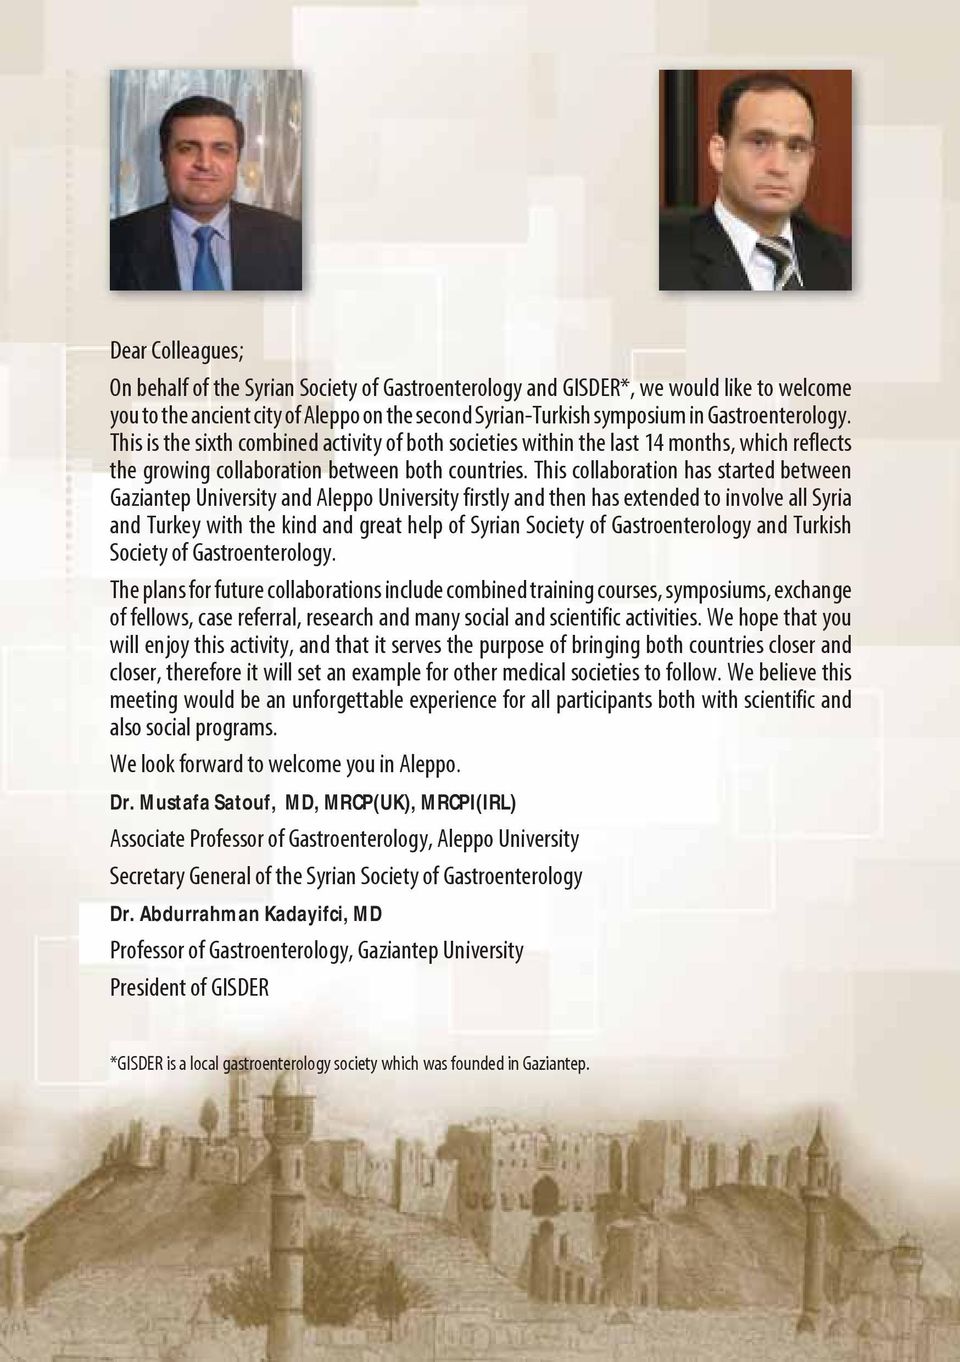 This collaboration has started between Gaziantep University and Aleppo University firstly and then has extended to involve all Syria and Turkey with the kind and great help of Syrian Society of